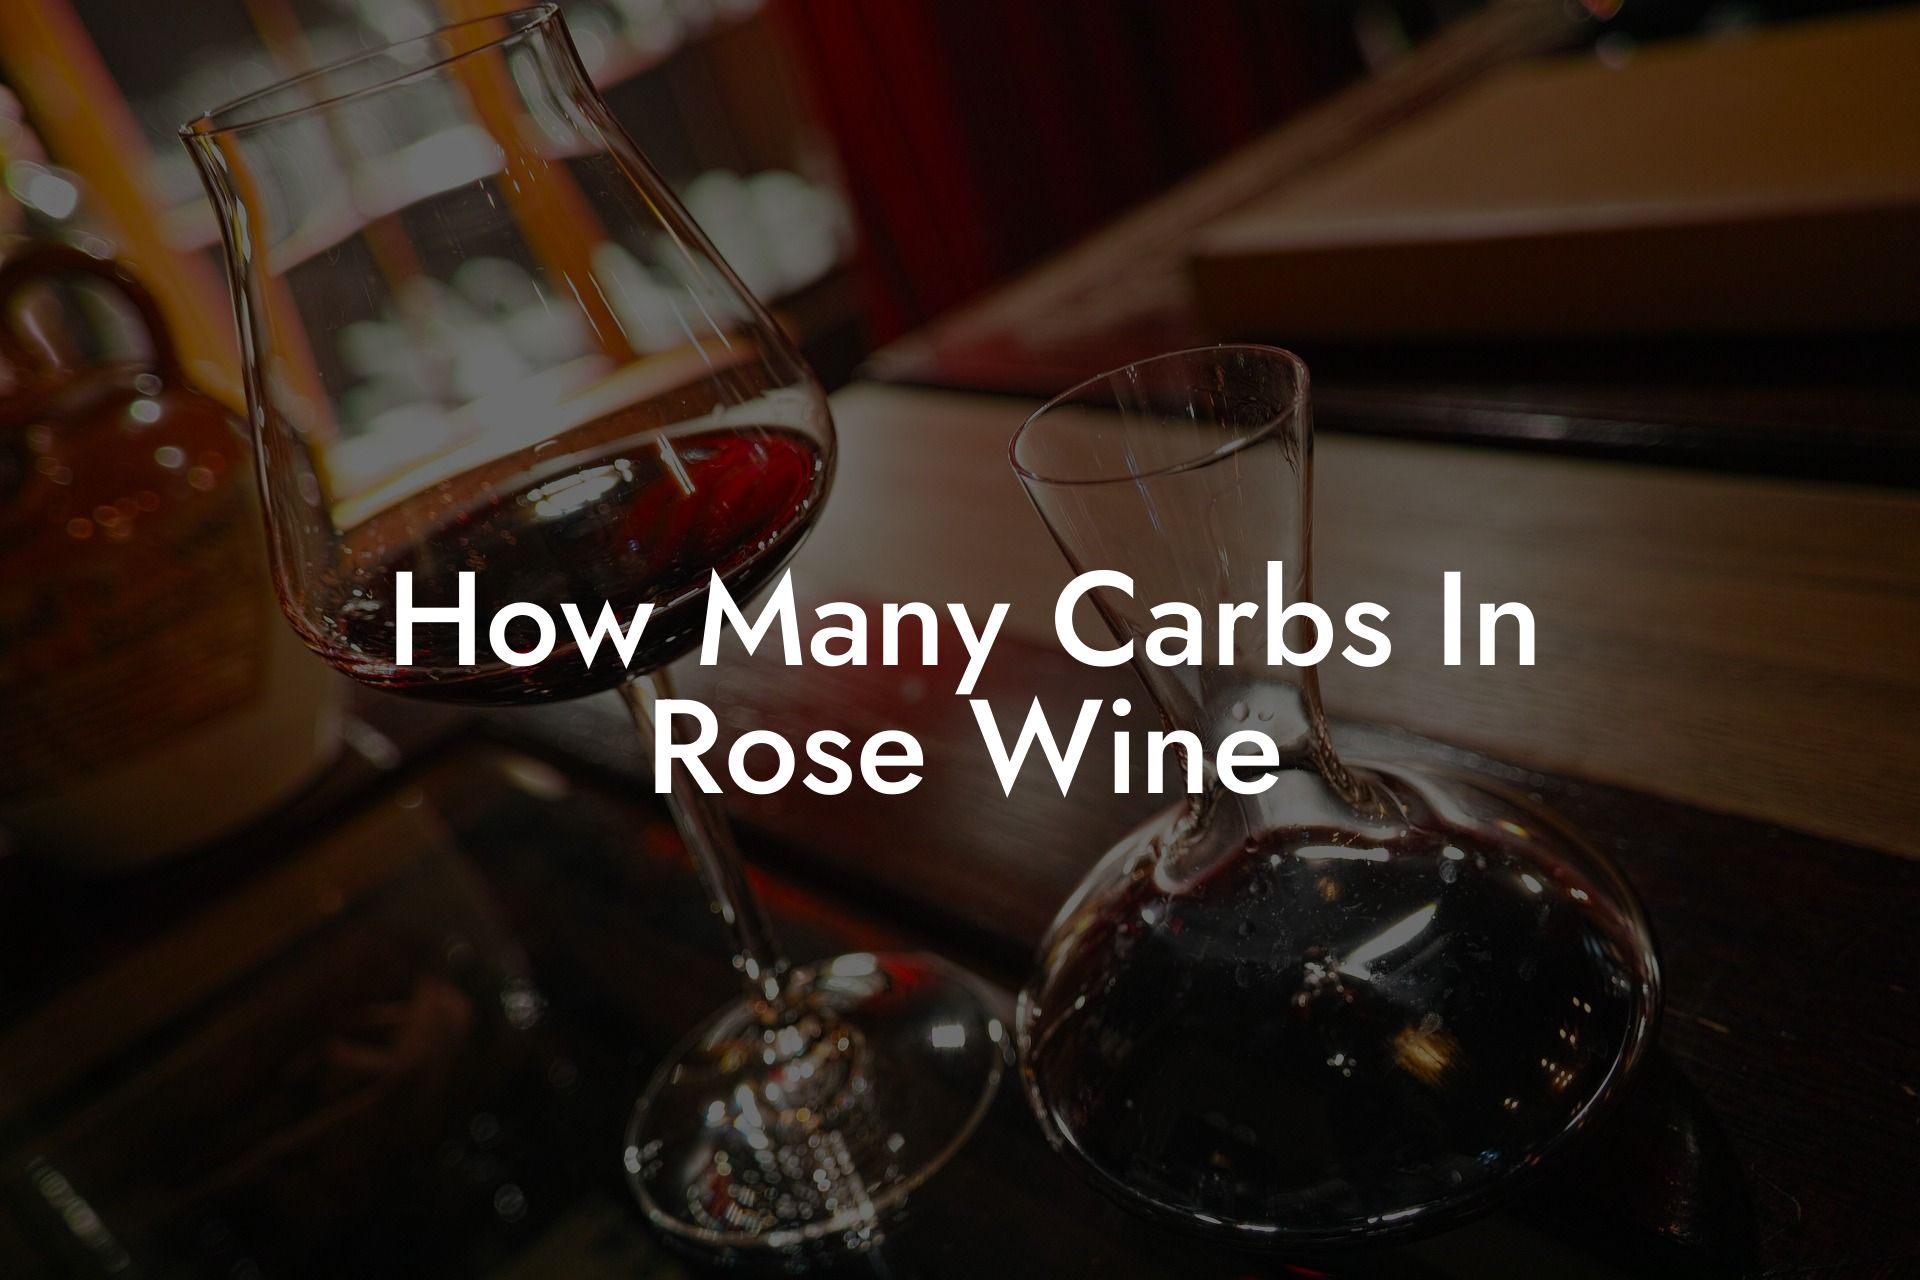 How Many Carbs In Rose Wine